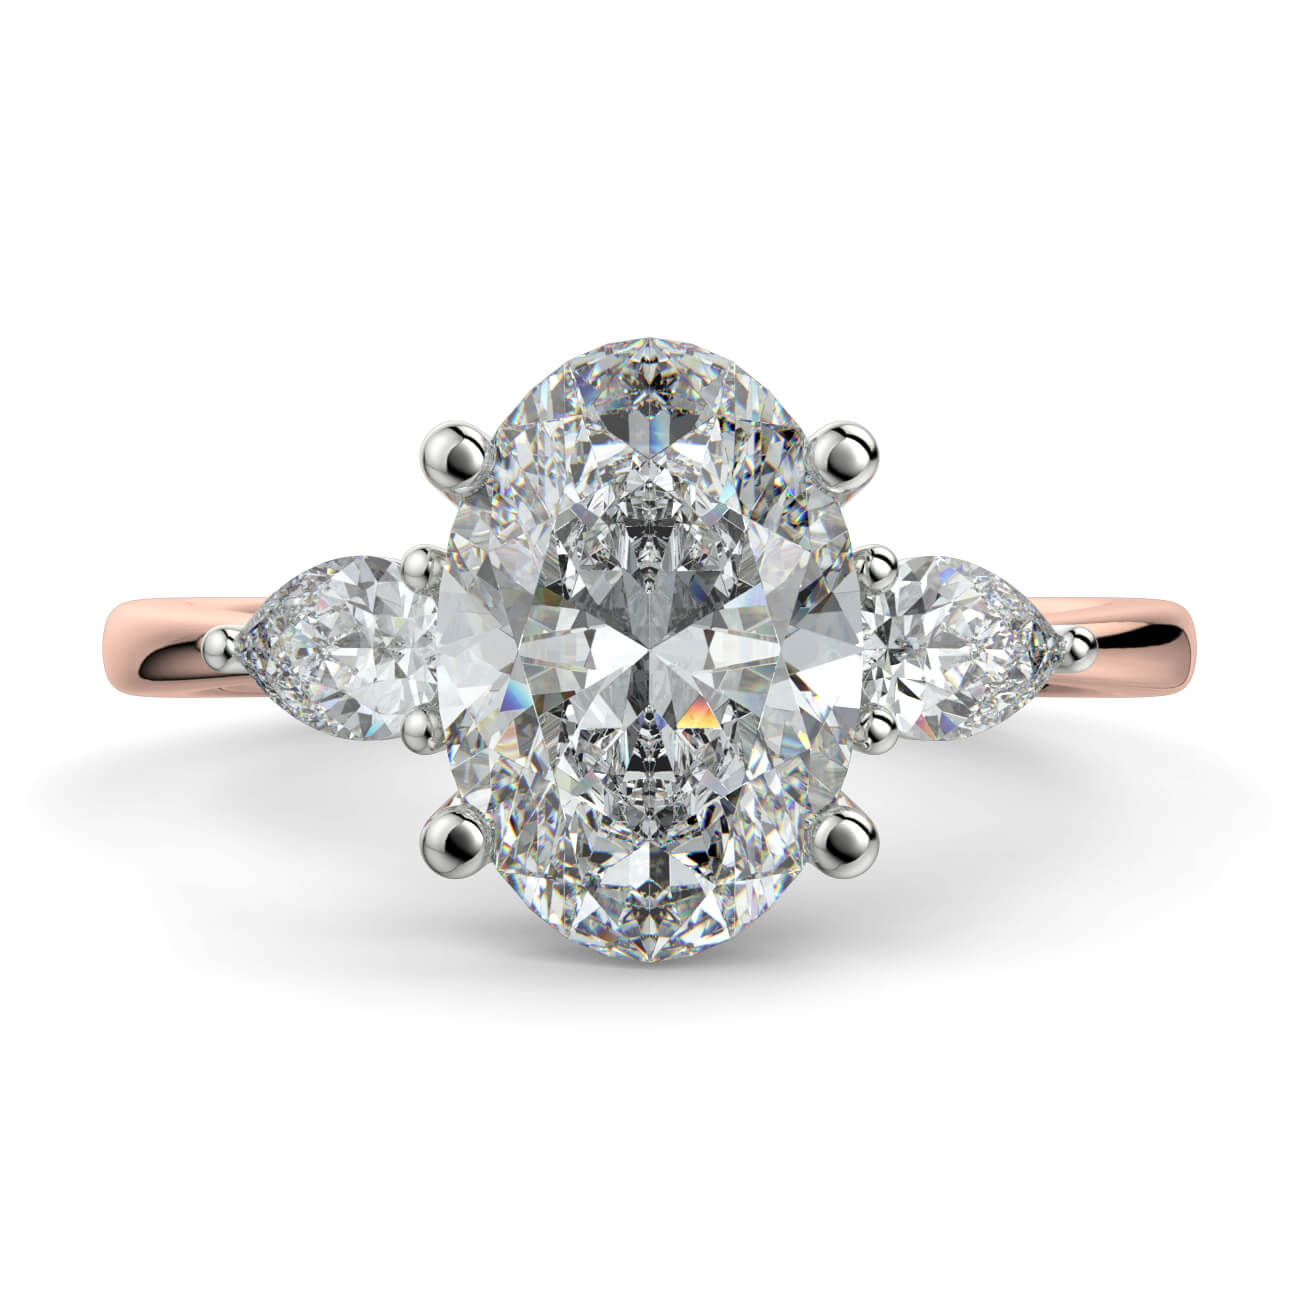 Oval Shape Diamond Ring With Pear Shape Side Diamonds In 18k Rose and White Gold – Australian Diamond Network